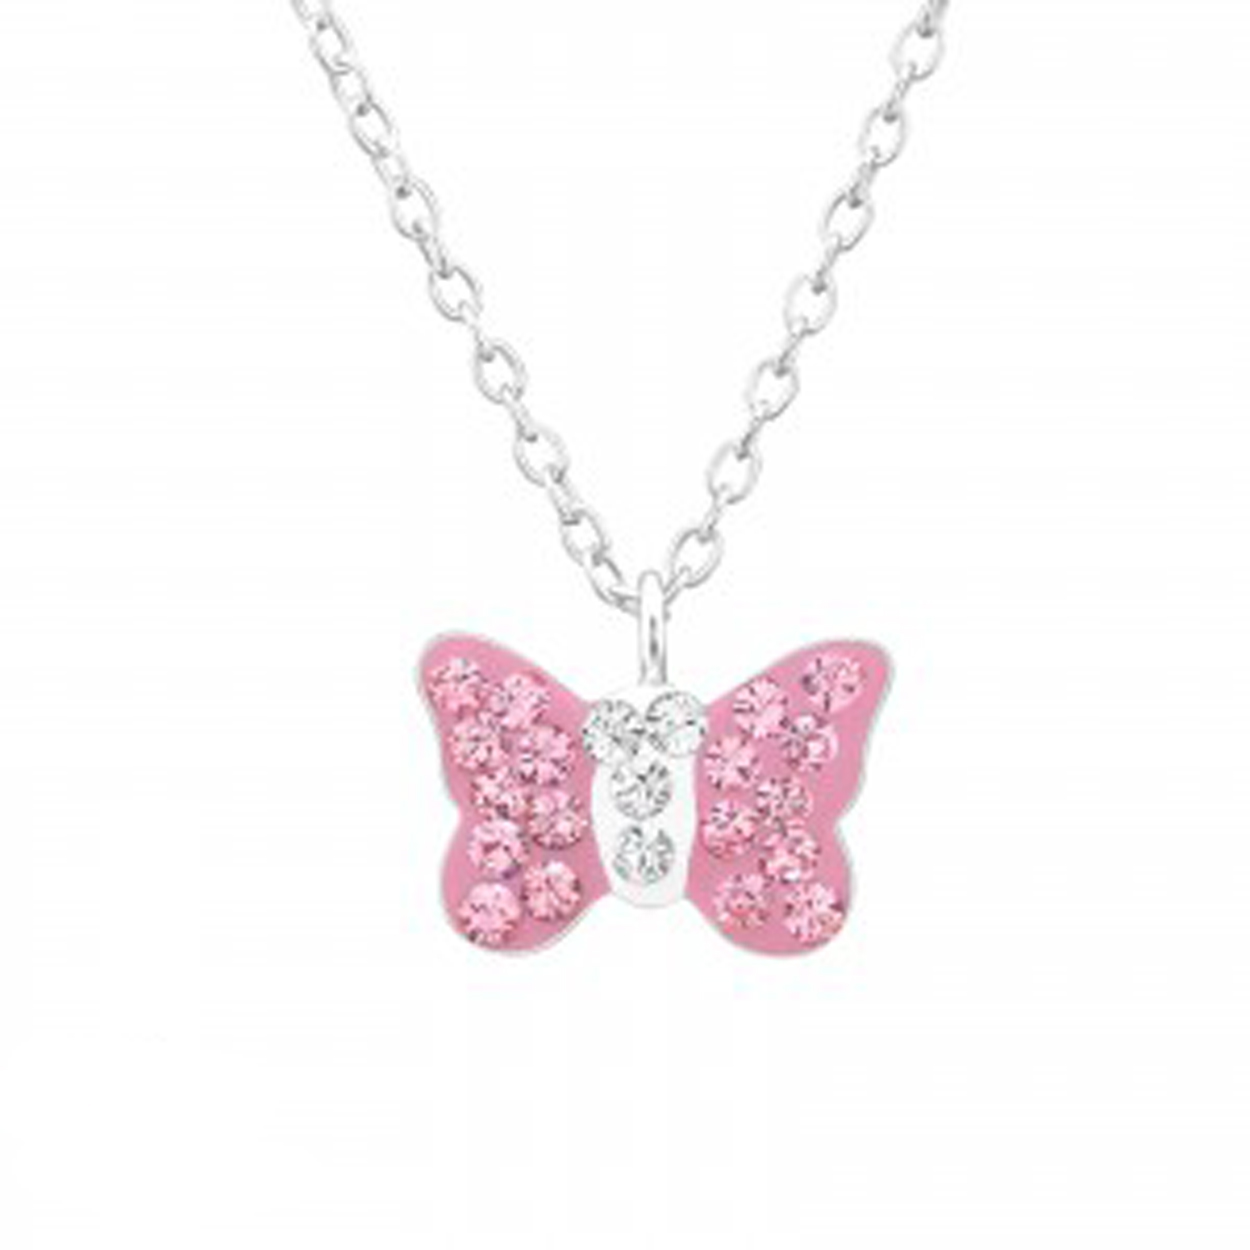 Girls silver necklace with pink Swarovski crystal butterfly pendant-0